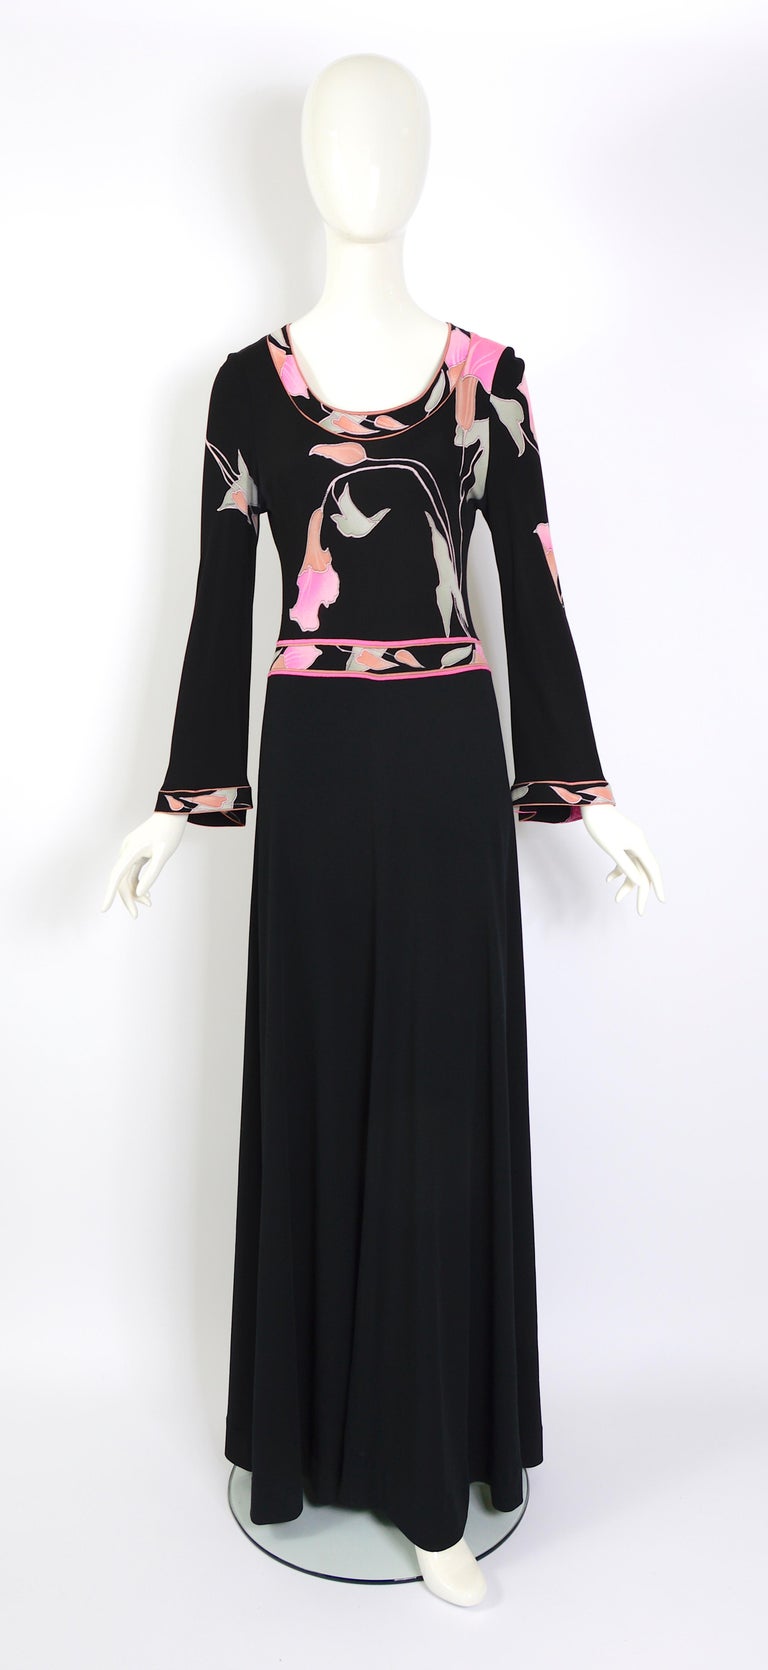 Signed Leonard Paris 1970s vintage maxi dress featuring bell sleeves and made in a botanical printed 100% silk jersey.
The dress is labeled size 4 but can accommodate a variety of sizes due to the stretch. 
Our doll is a french size 36 and the dress